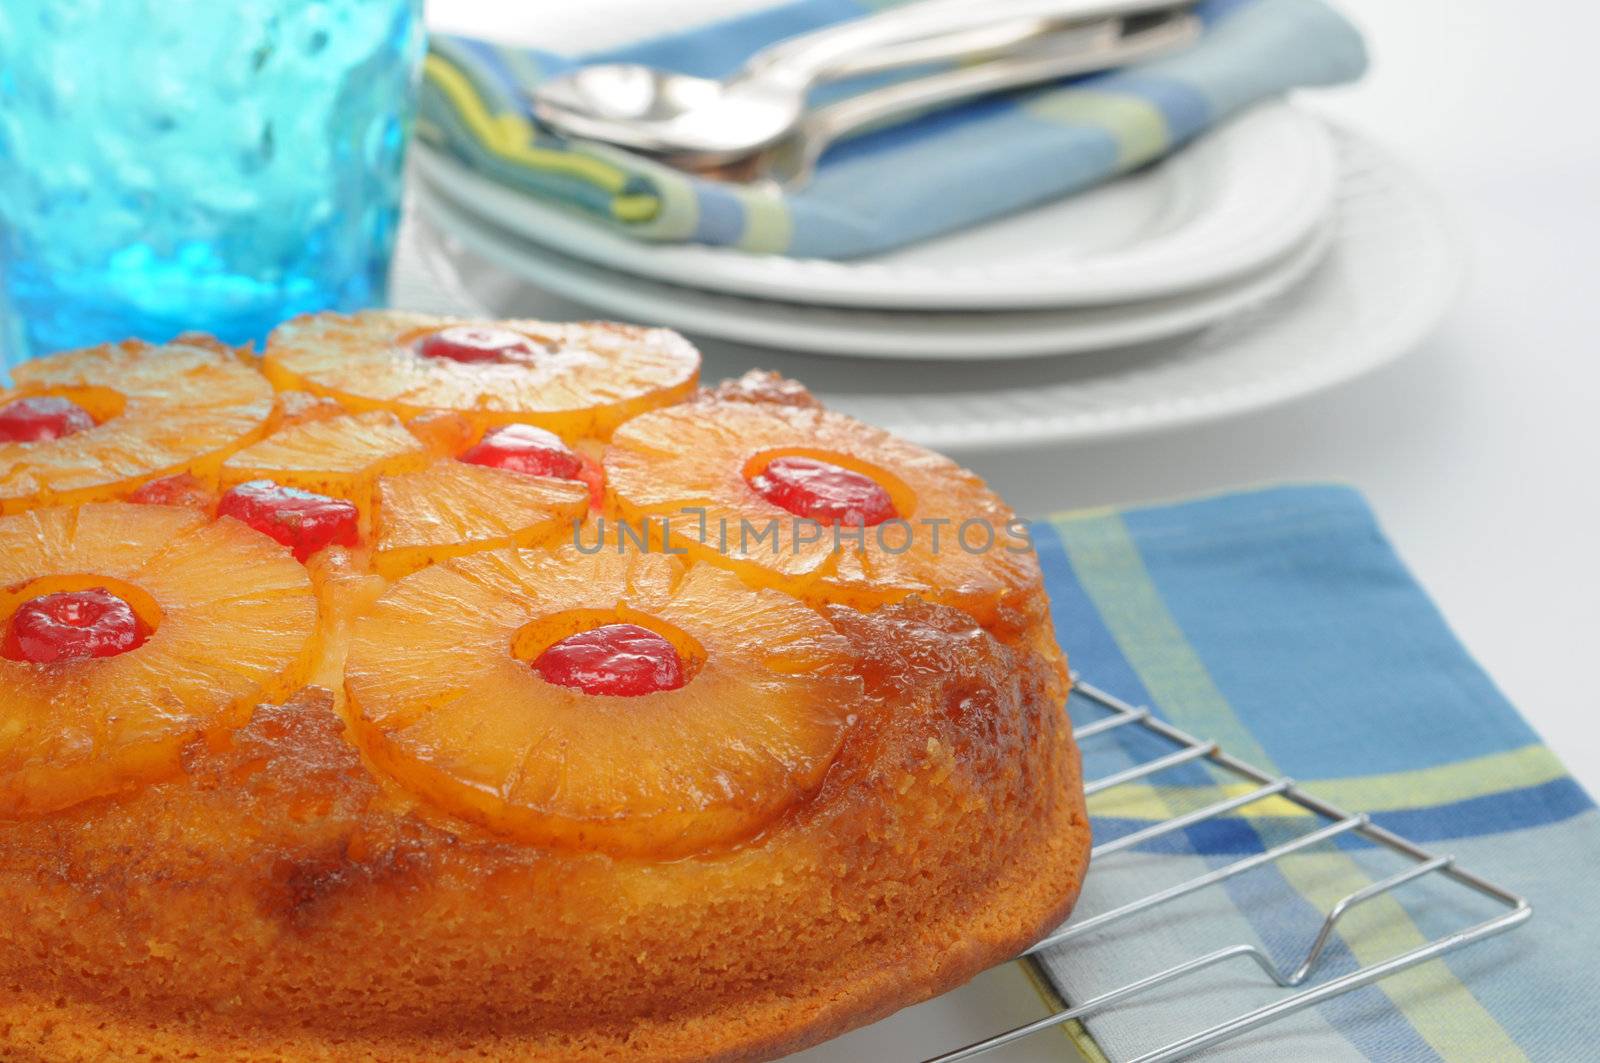 Pineapple Upside Down Cake by billberryphotography